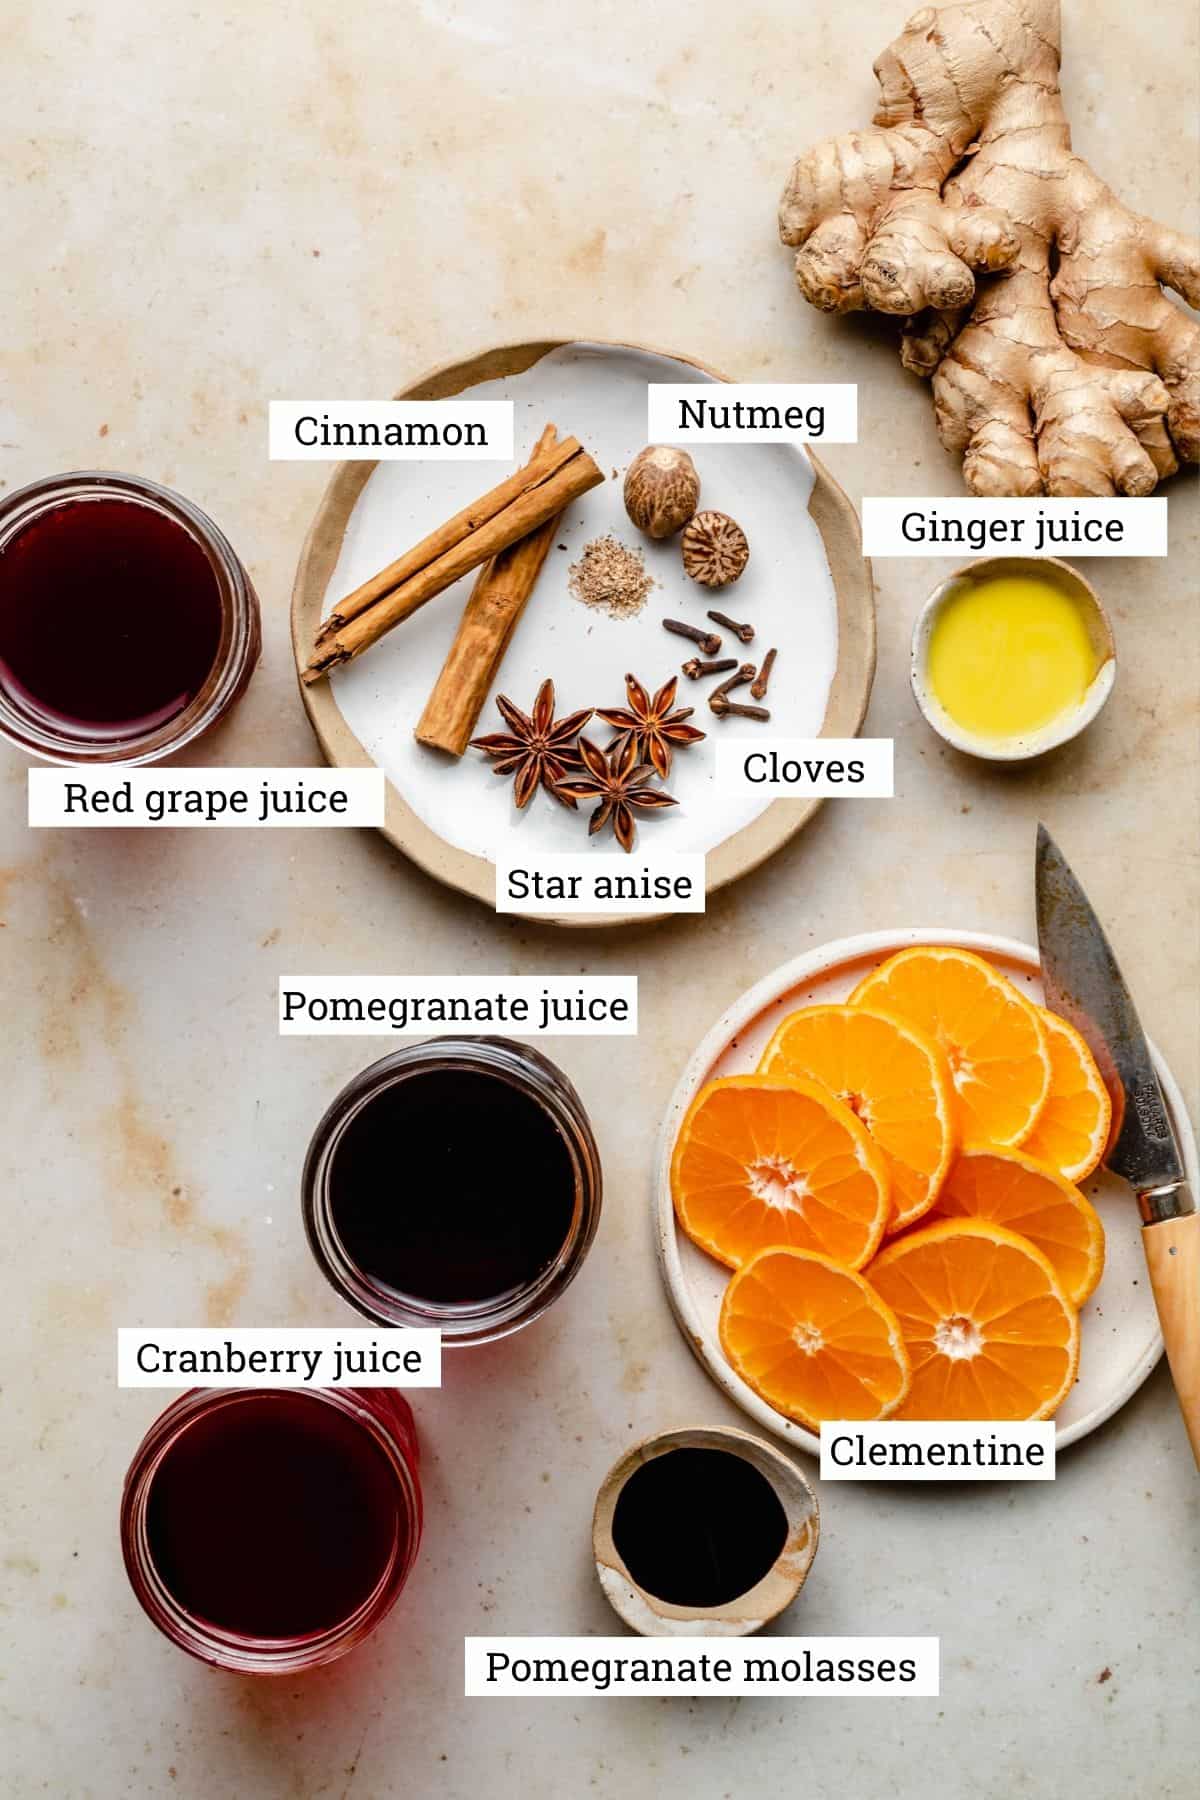 Ingredients for mulled wine including juices, spices, clementine, pomegranate molasses and ginger.